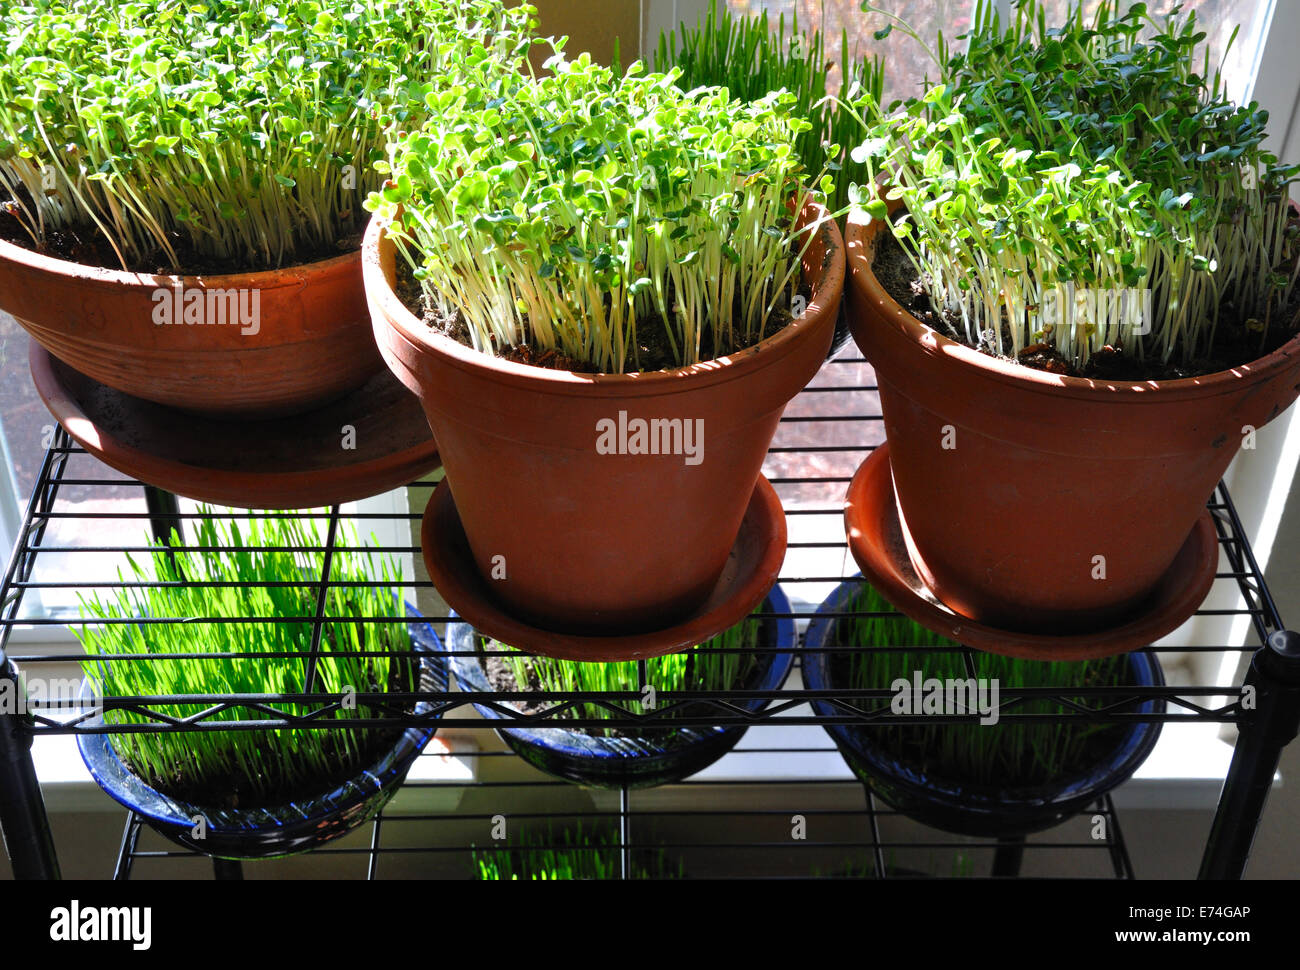 Microgreens sprouts Stock Photo